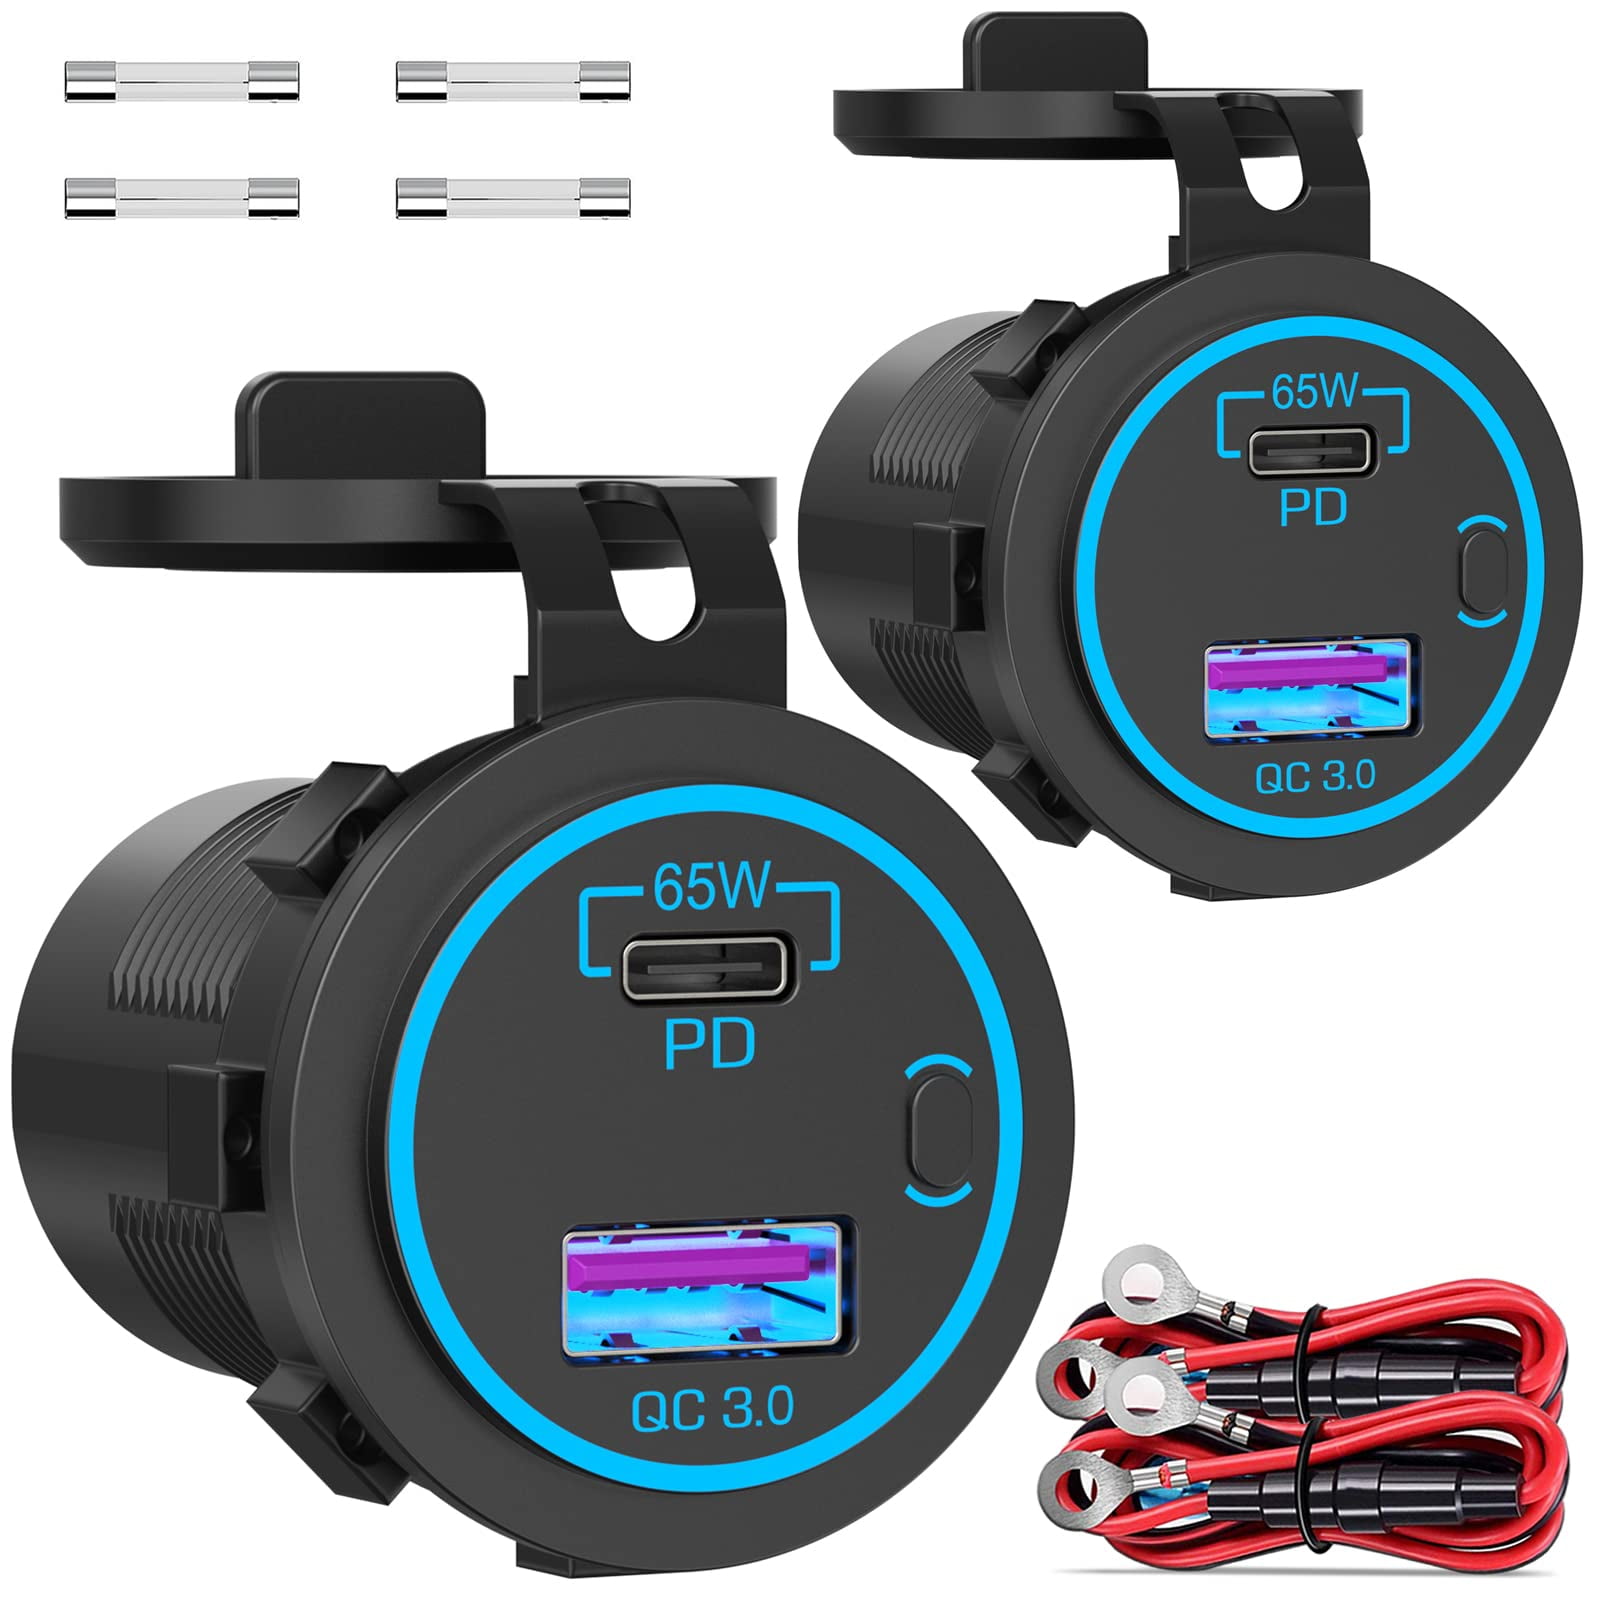 83W 12V USB Outlet Laptop Charger: Newest 2 Pack 65W USB-C PD3.0 and 18W Multi Car USB Port 12V Socket Waterproof with Power Switch for Car Boat Marine Bus Truck Golf